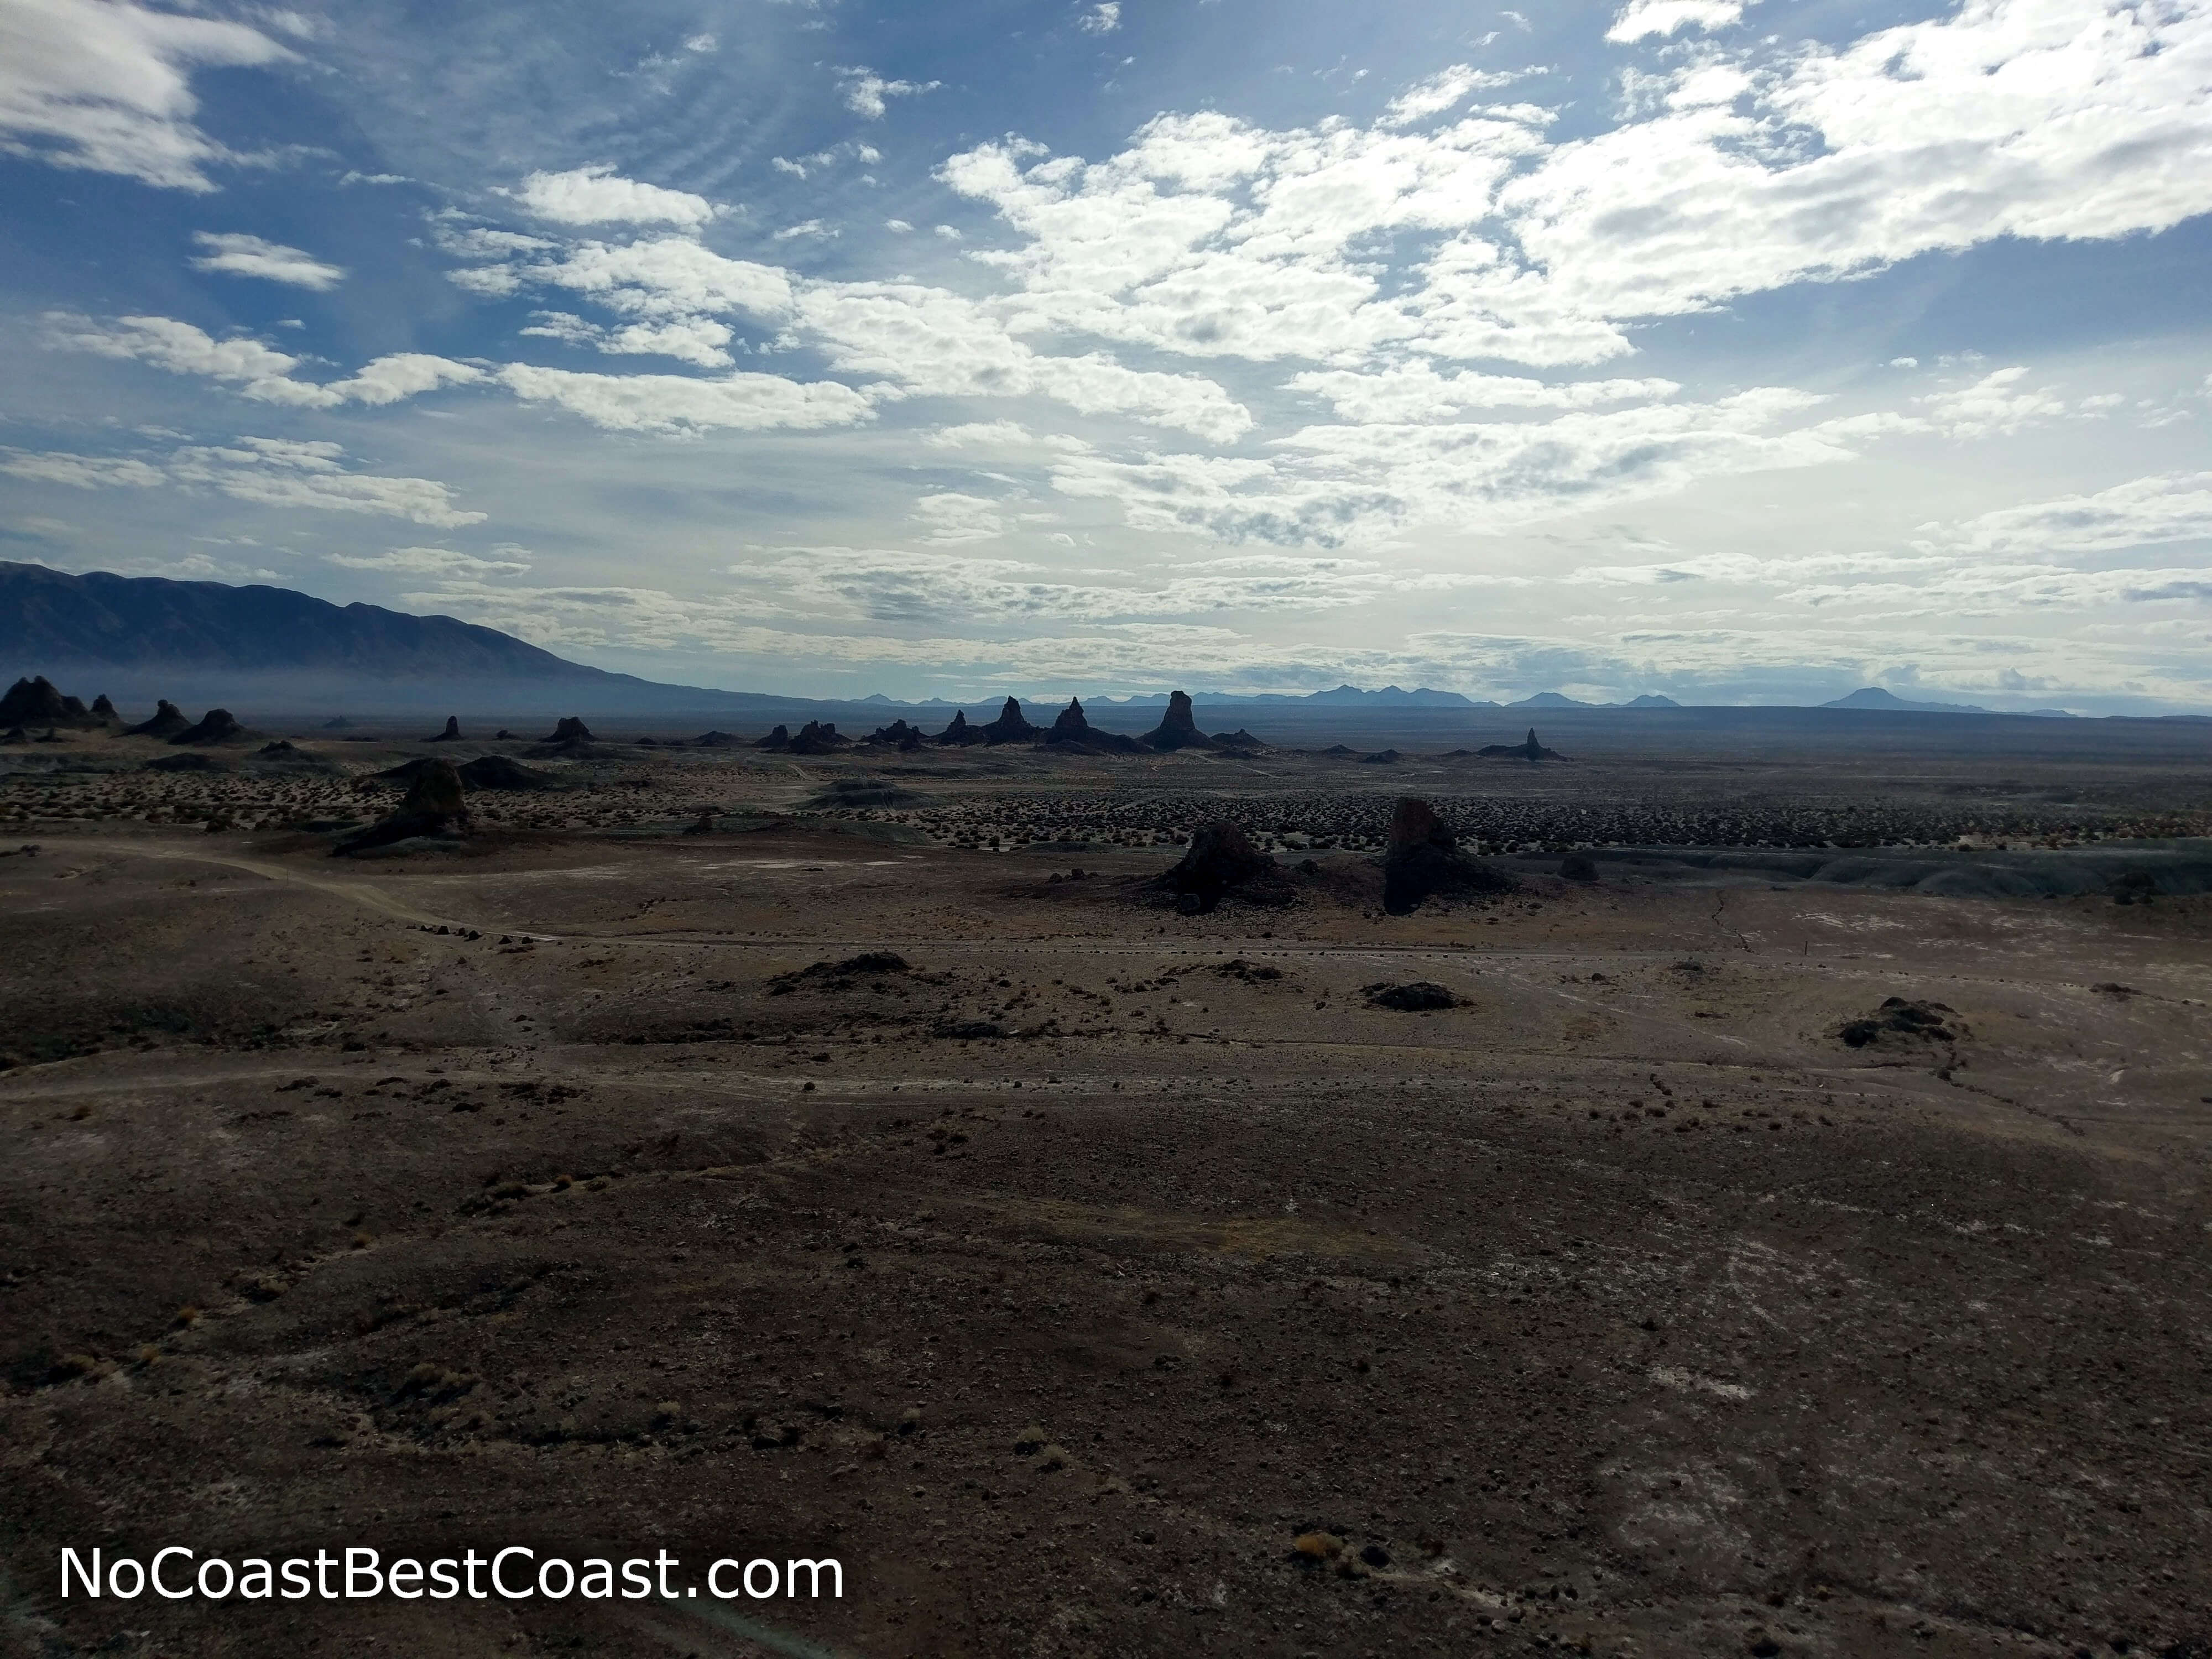 The Trona Pinnacles from a distance